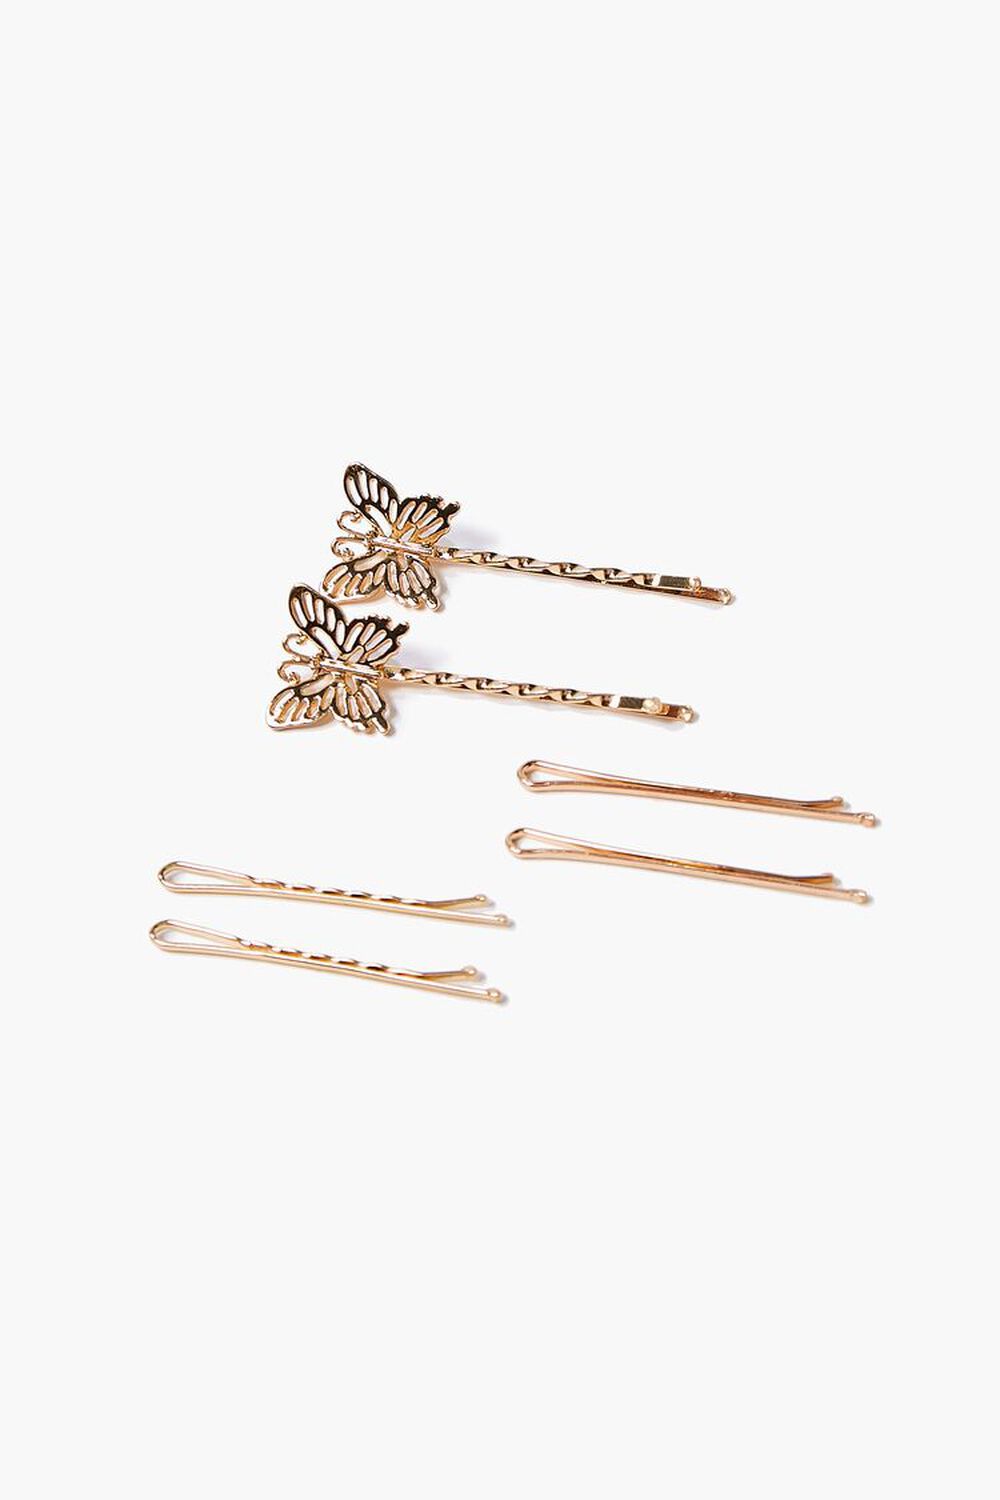 GOLD Butterfly Bobby Pin Set, image 1